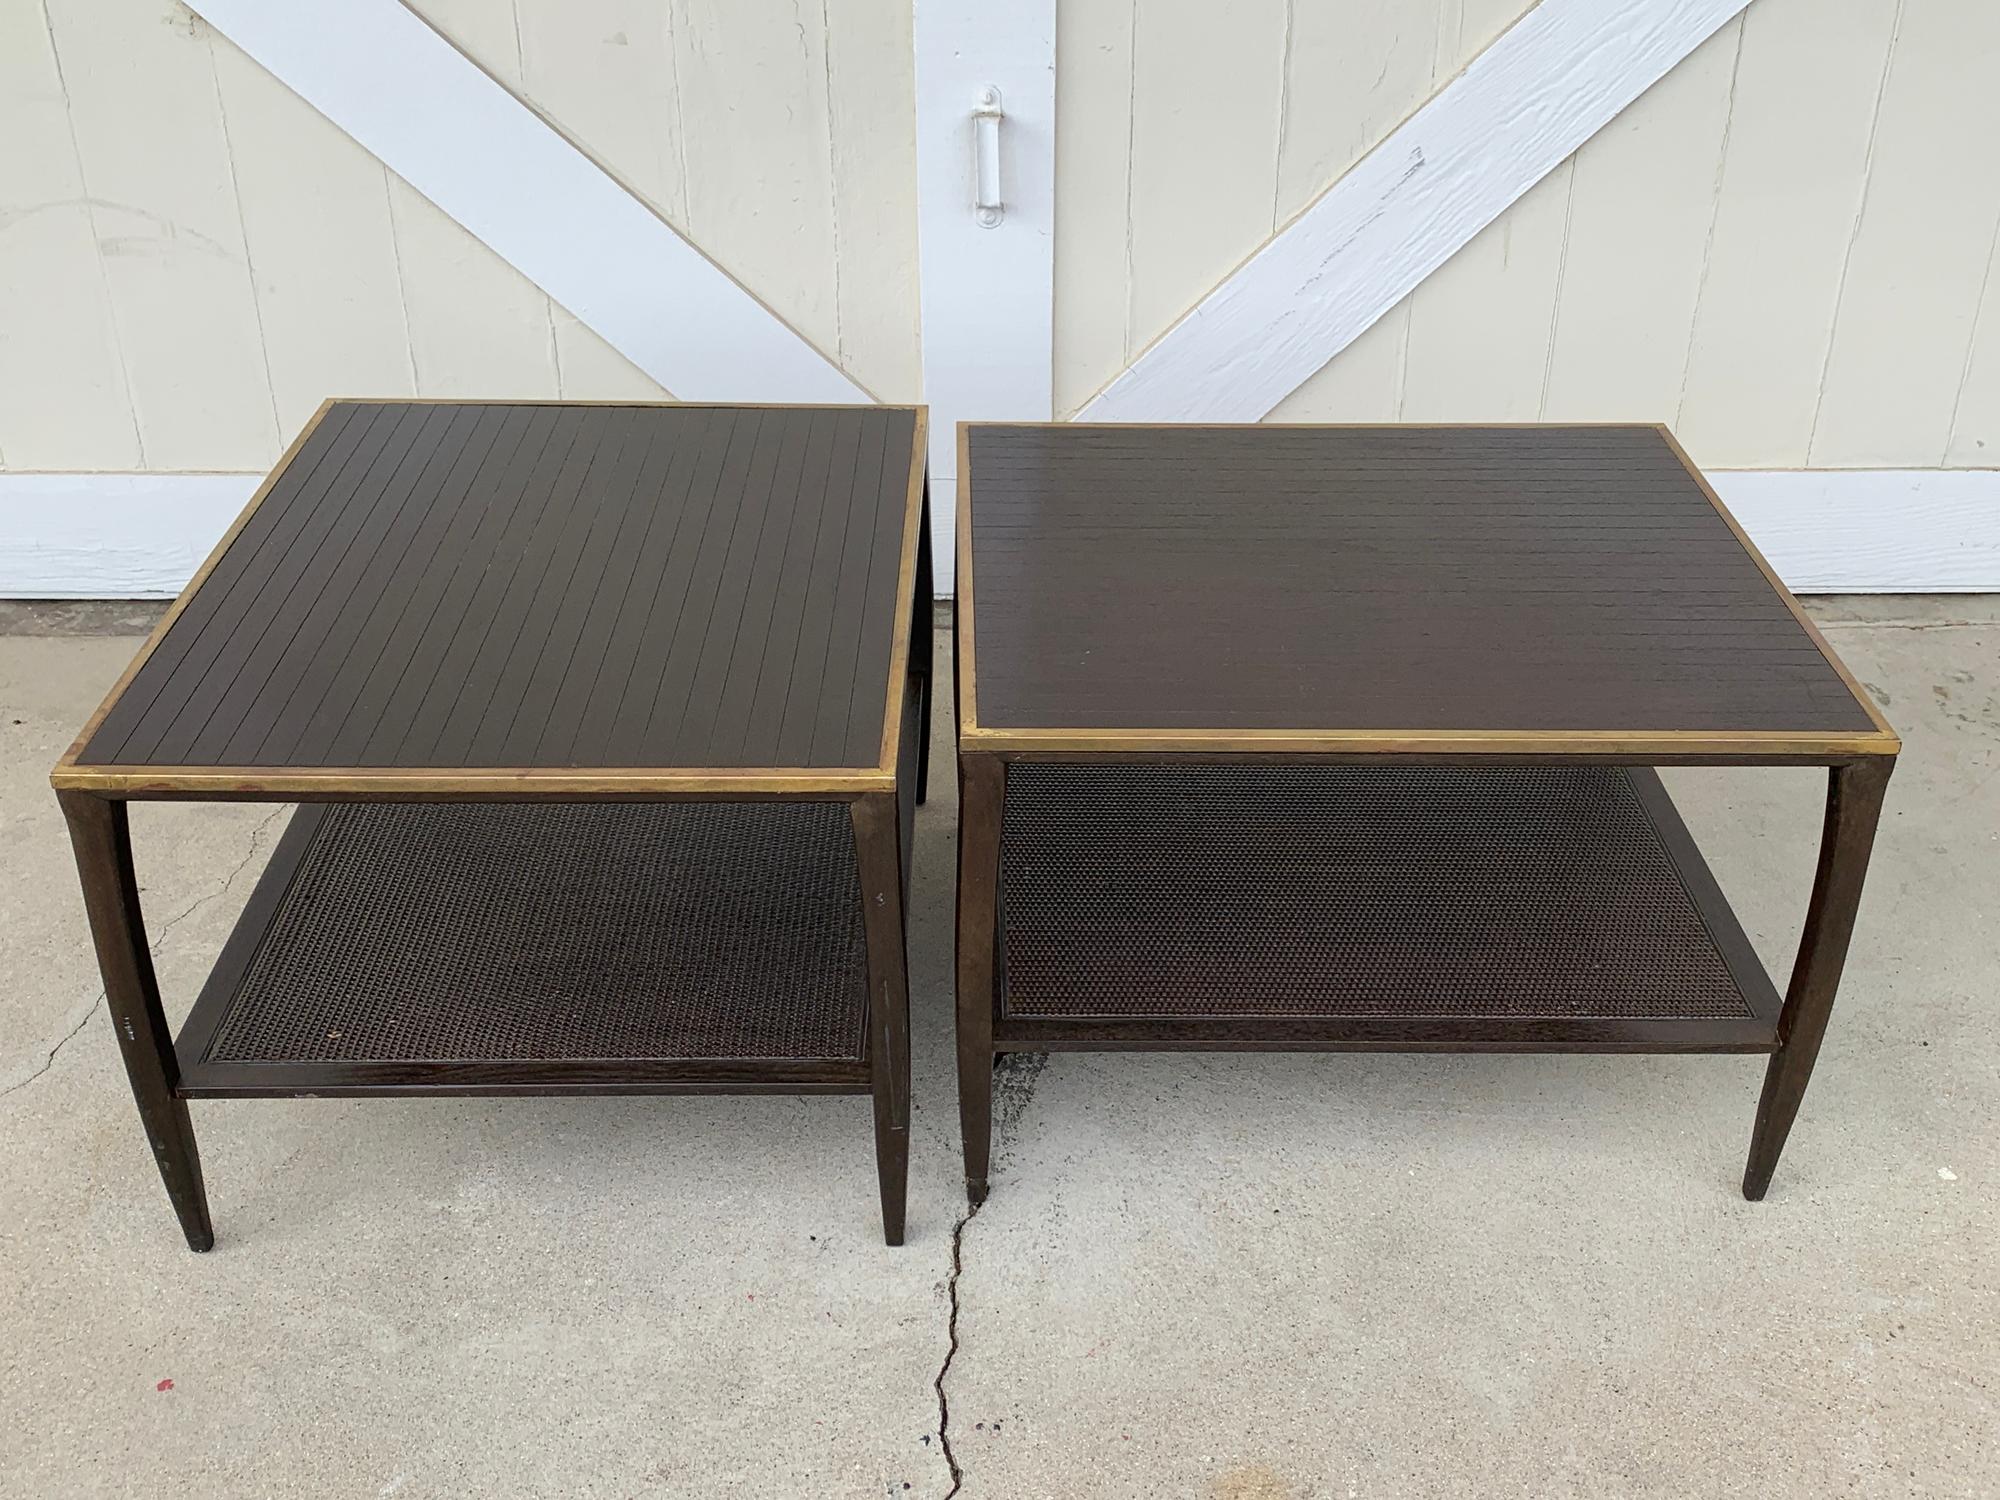 Beautiful pair of side or end tables in the manner of Paul McCobb.
The tables have beautiful dark wood frames with a brass trim and weaved rattan bottom shelf.
The tables are in good vintage condition with minor nicks and scuffs but can be used in